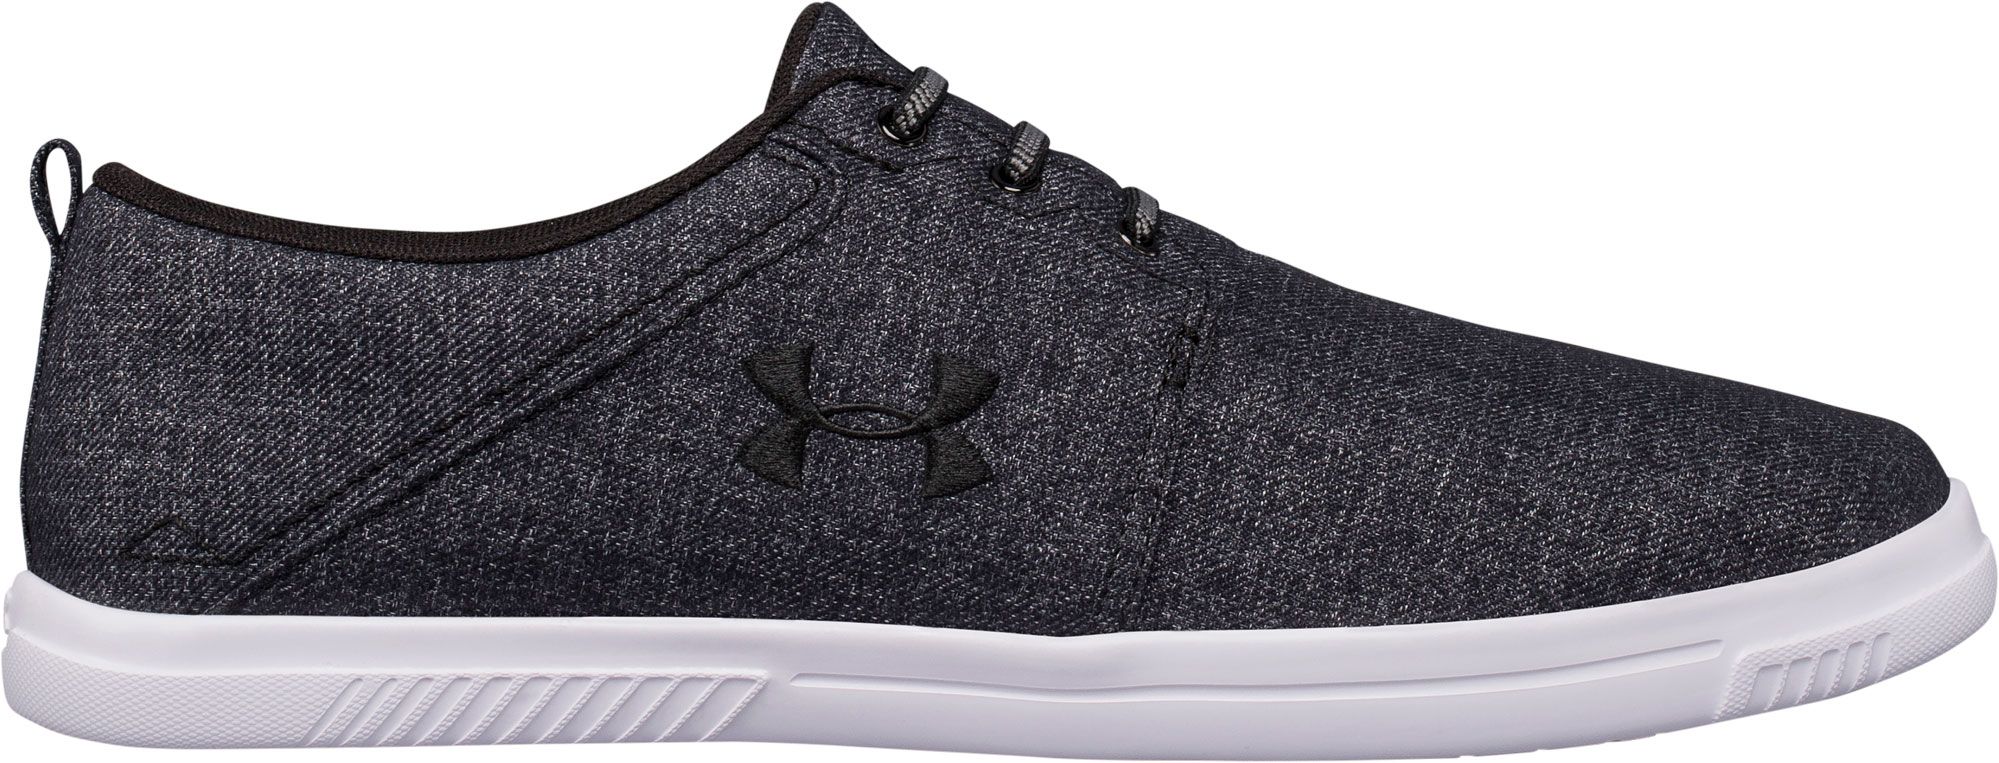 under armor casual shoes